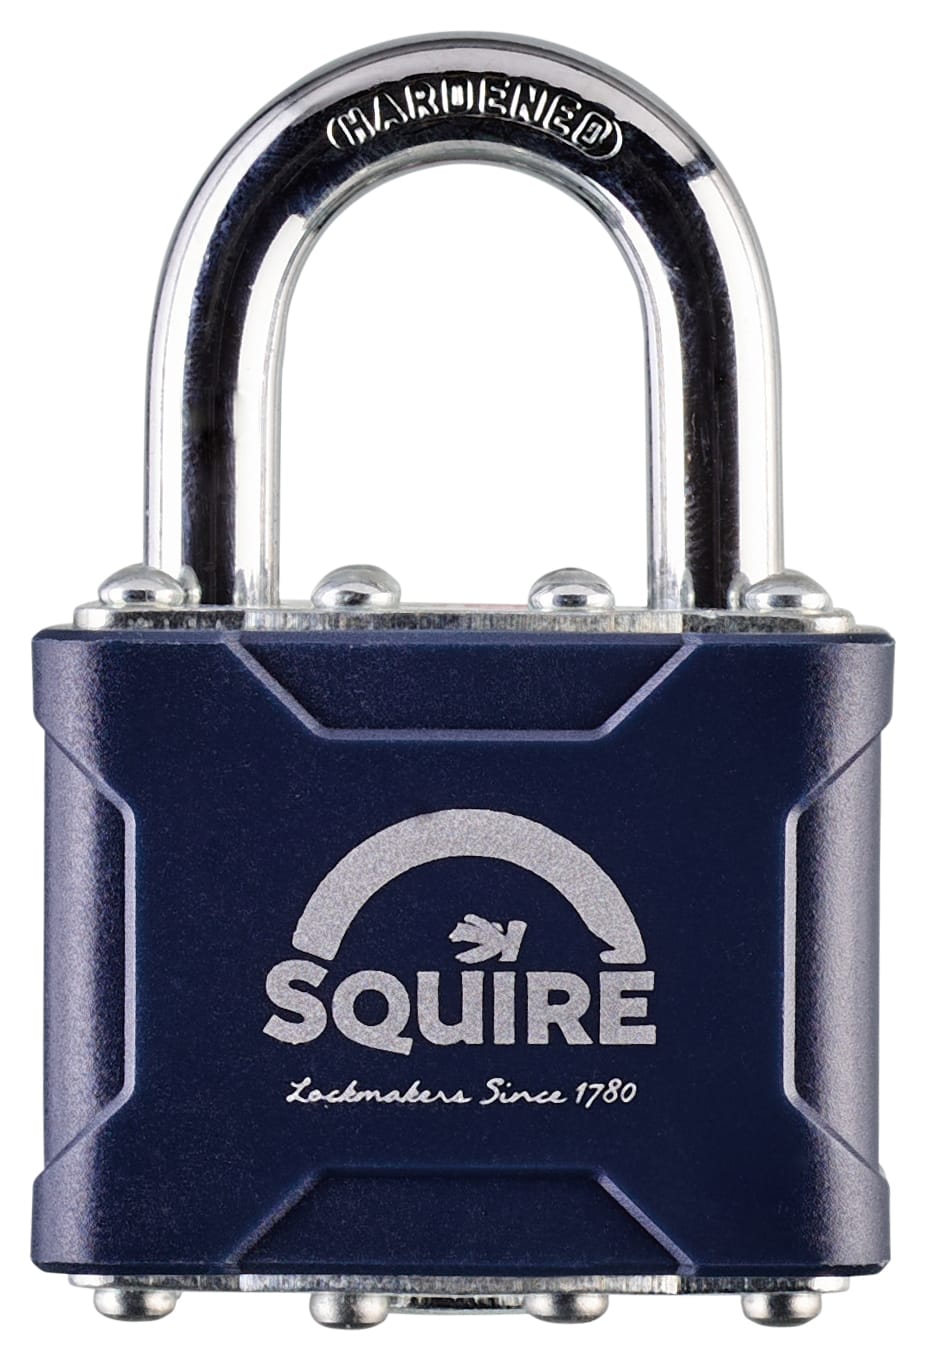 Squire Hardened Steel Shackle Laminated Padlock with Fixings